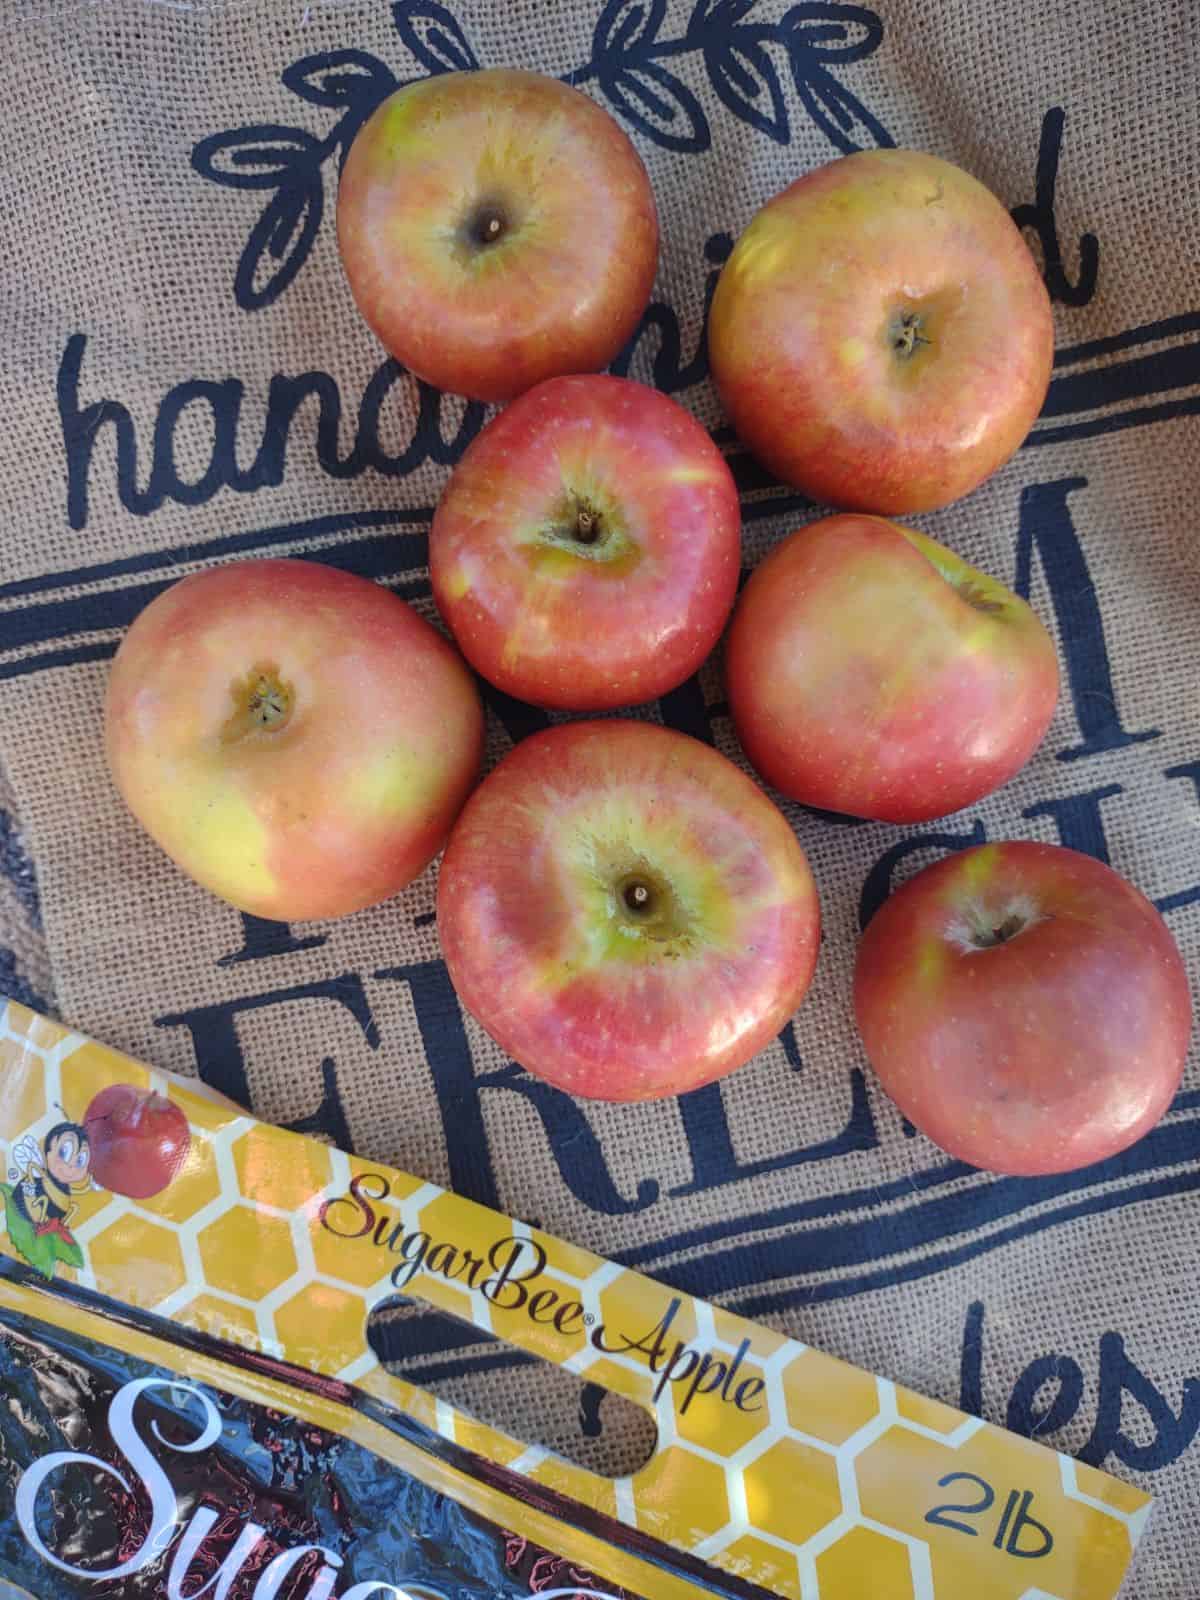 An overhead picture of Sugar Bee apples on burlap with the bag in the bottom of the photo.